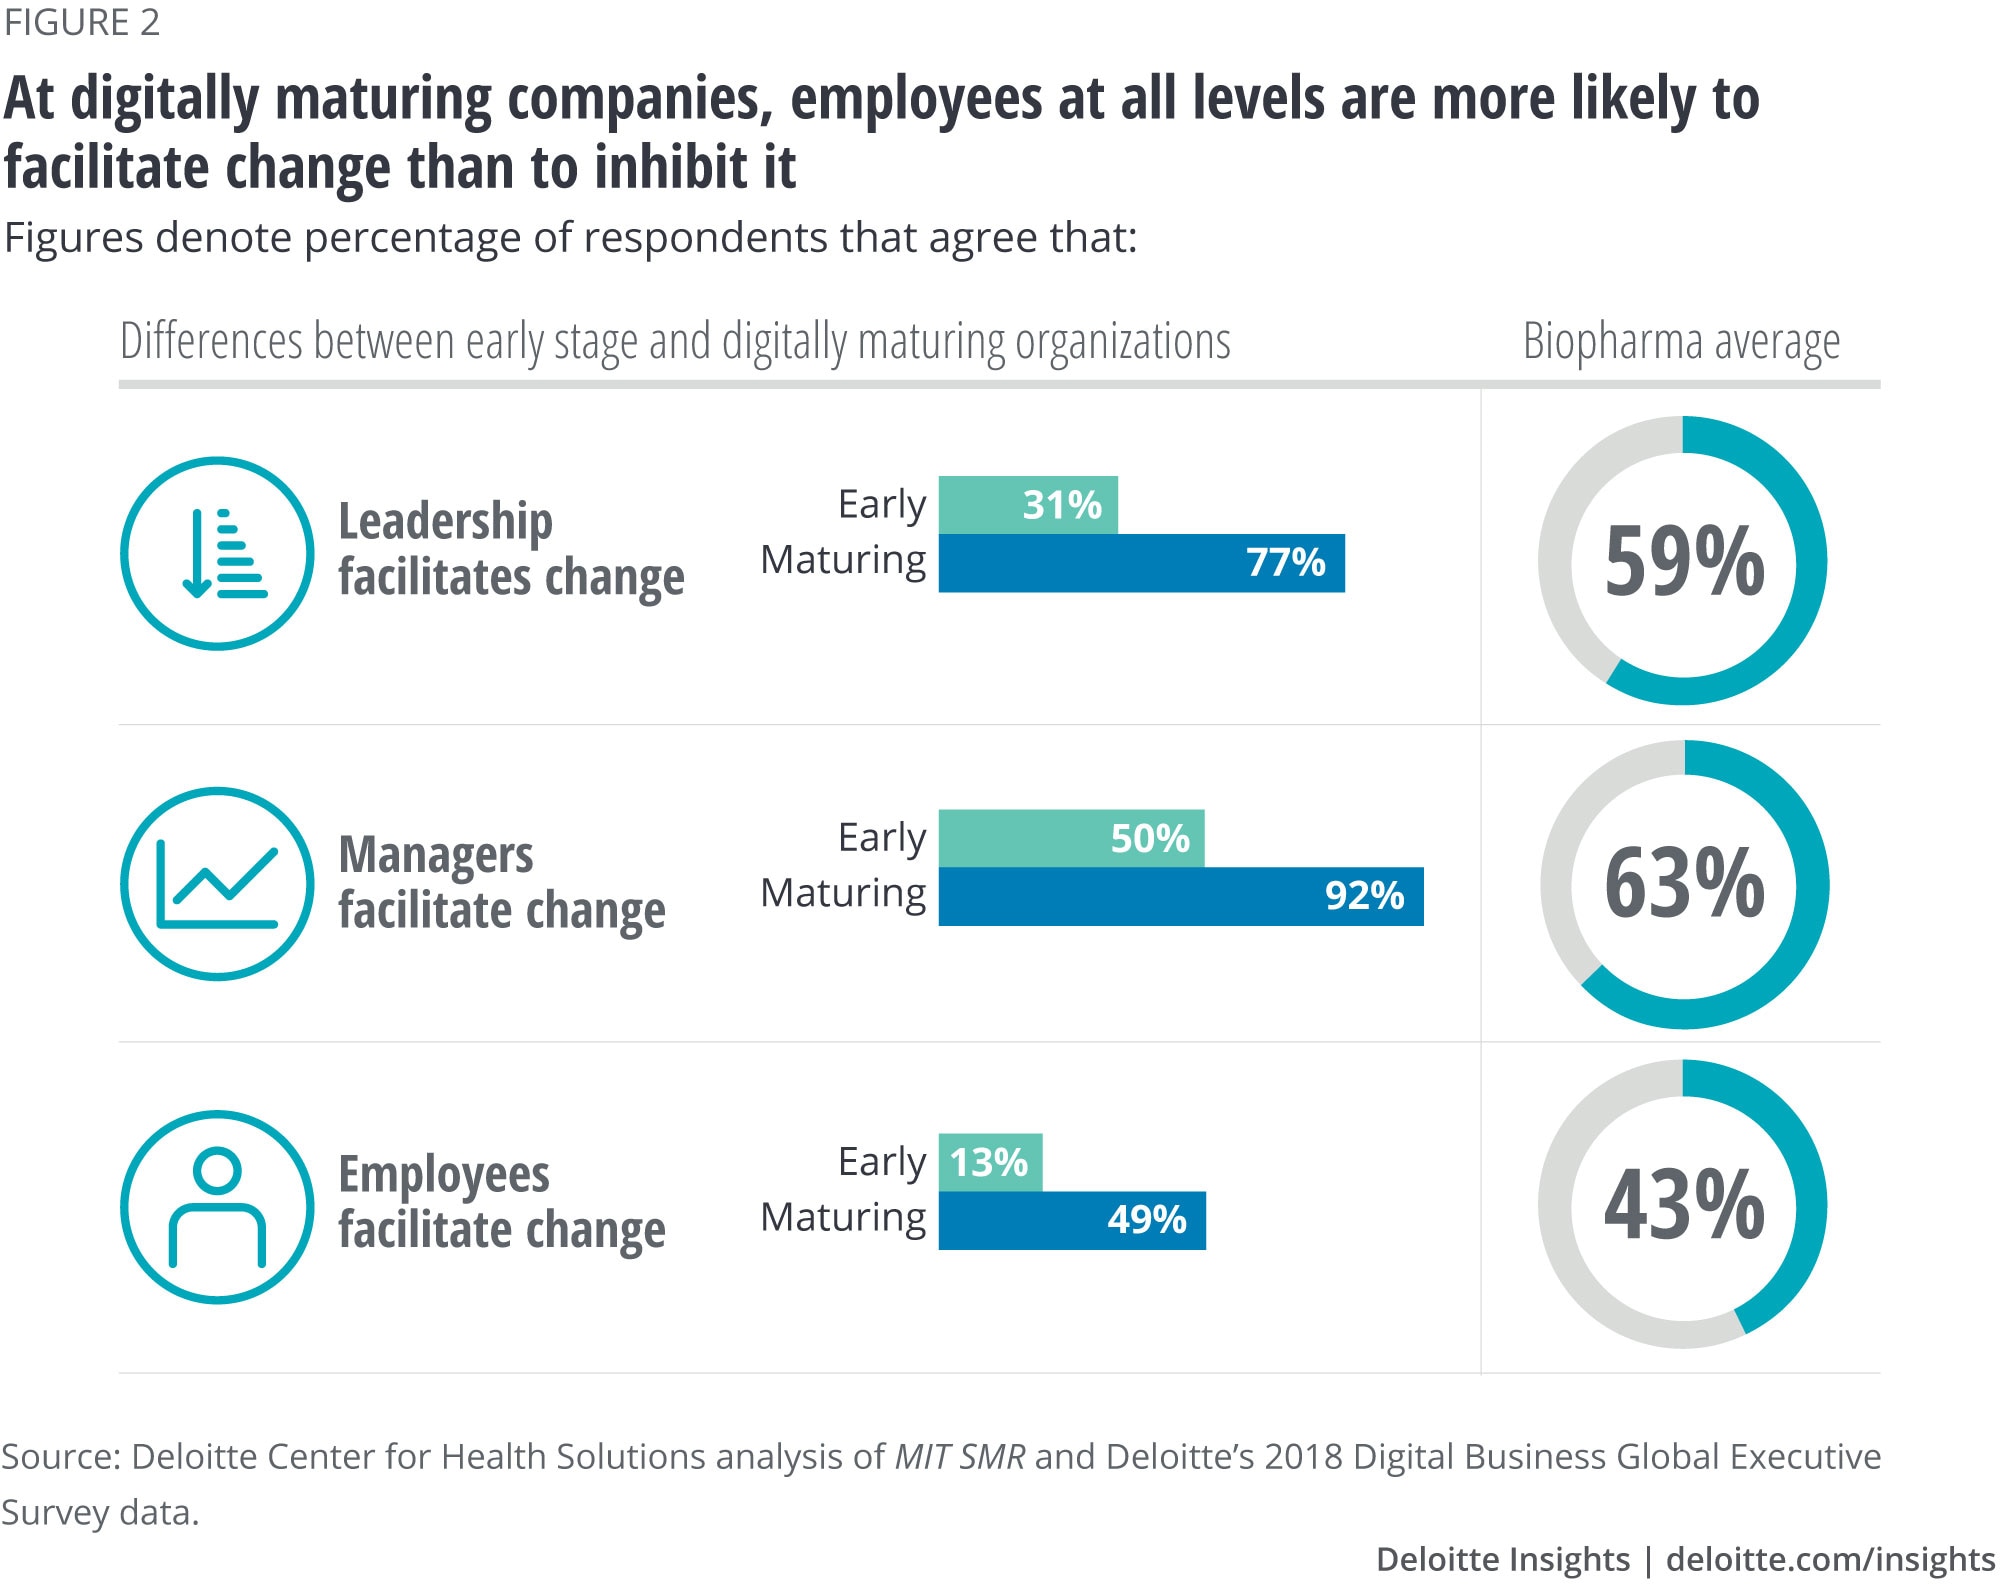 At digitally mature companies, employees at all levels are more likely to facilitate change than to inhibit it 